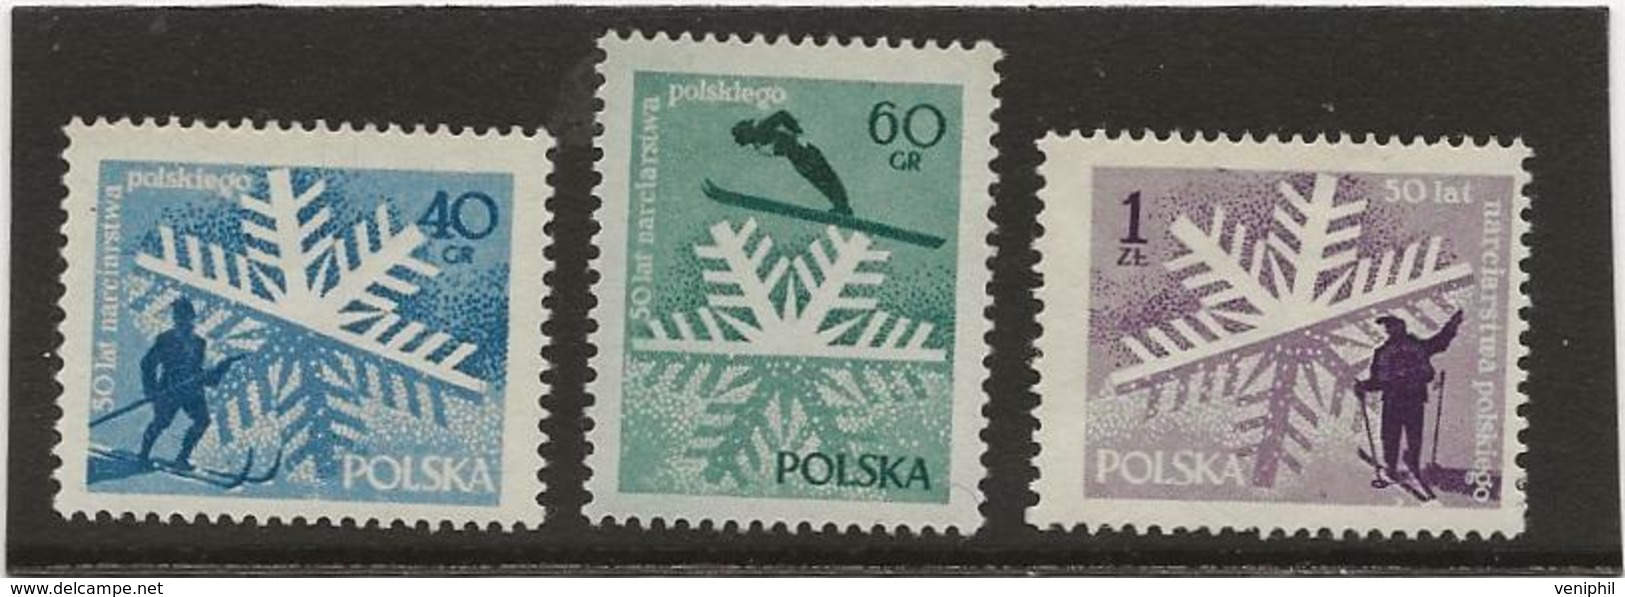 POLOGNE - N° 882 à 884 NEUF INFIME CHARNIERE -  ANNEE 1956 - Unused Stamps